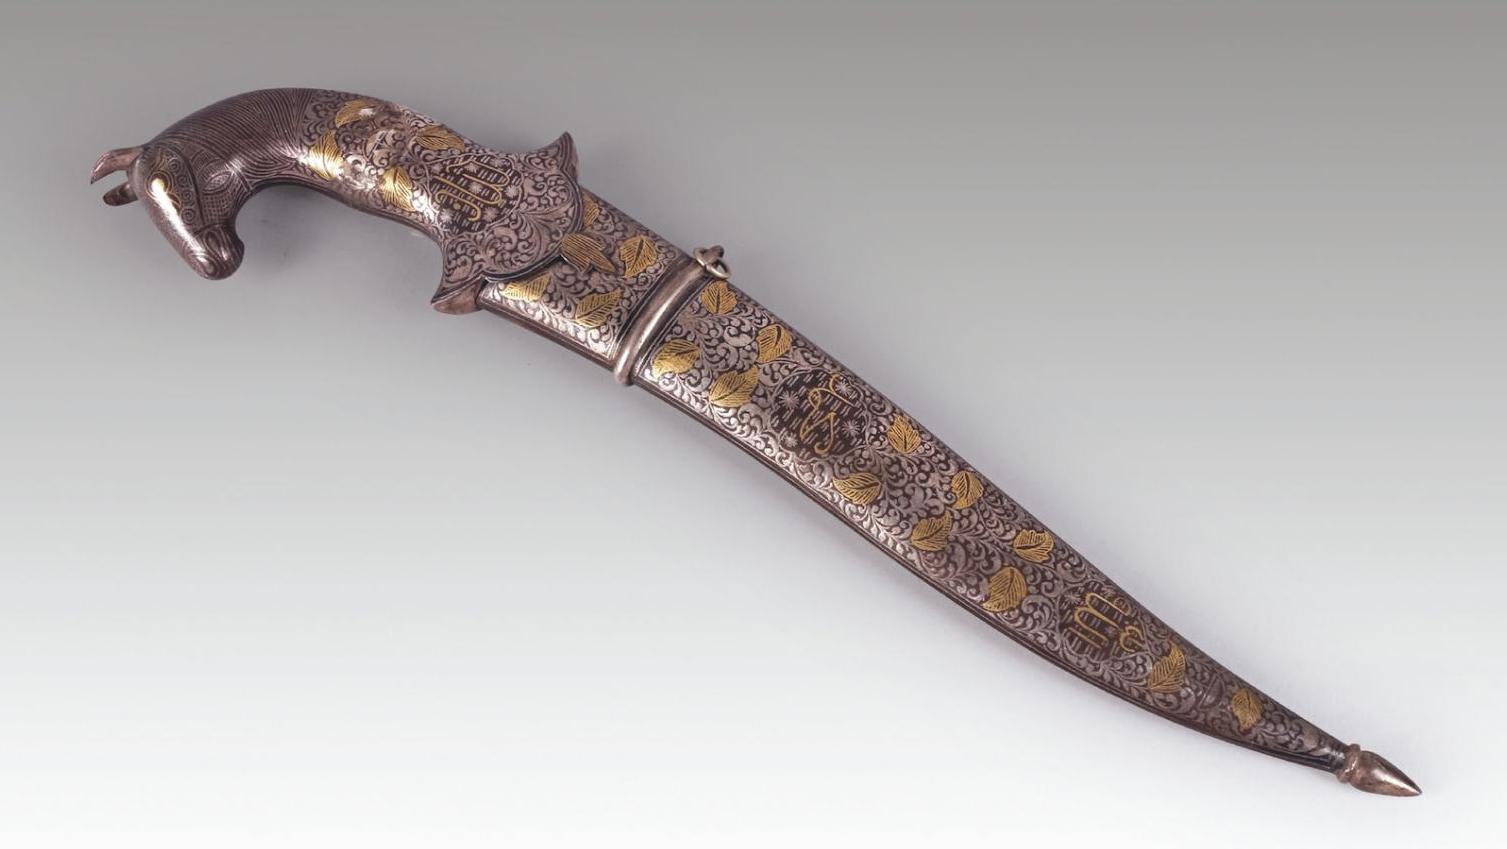 Persian Pech Quabz knife, 19th century, iron handle and scabbard with gold and silver... D as in Damascene